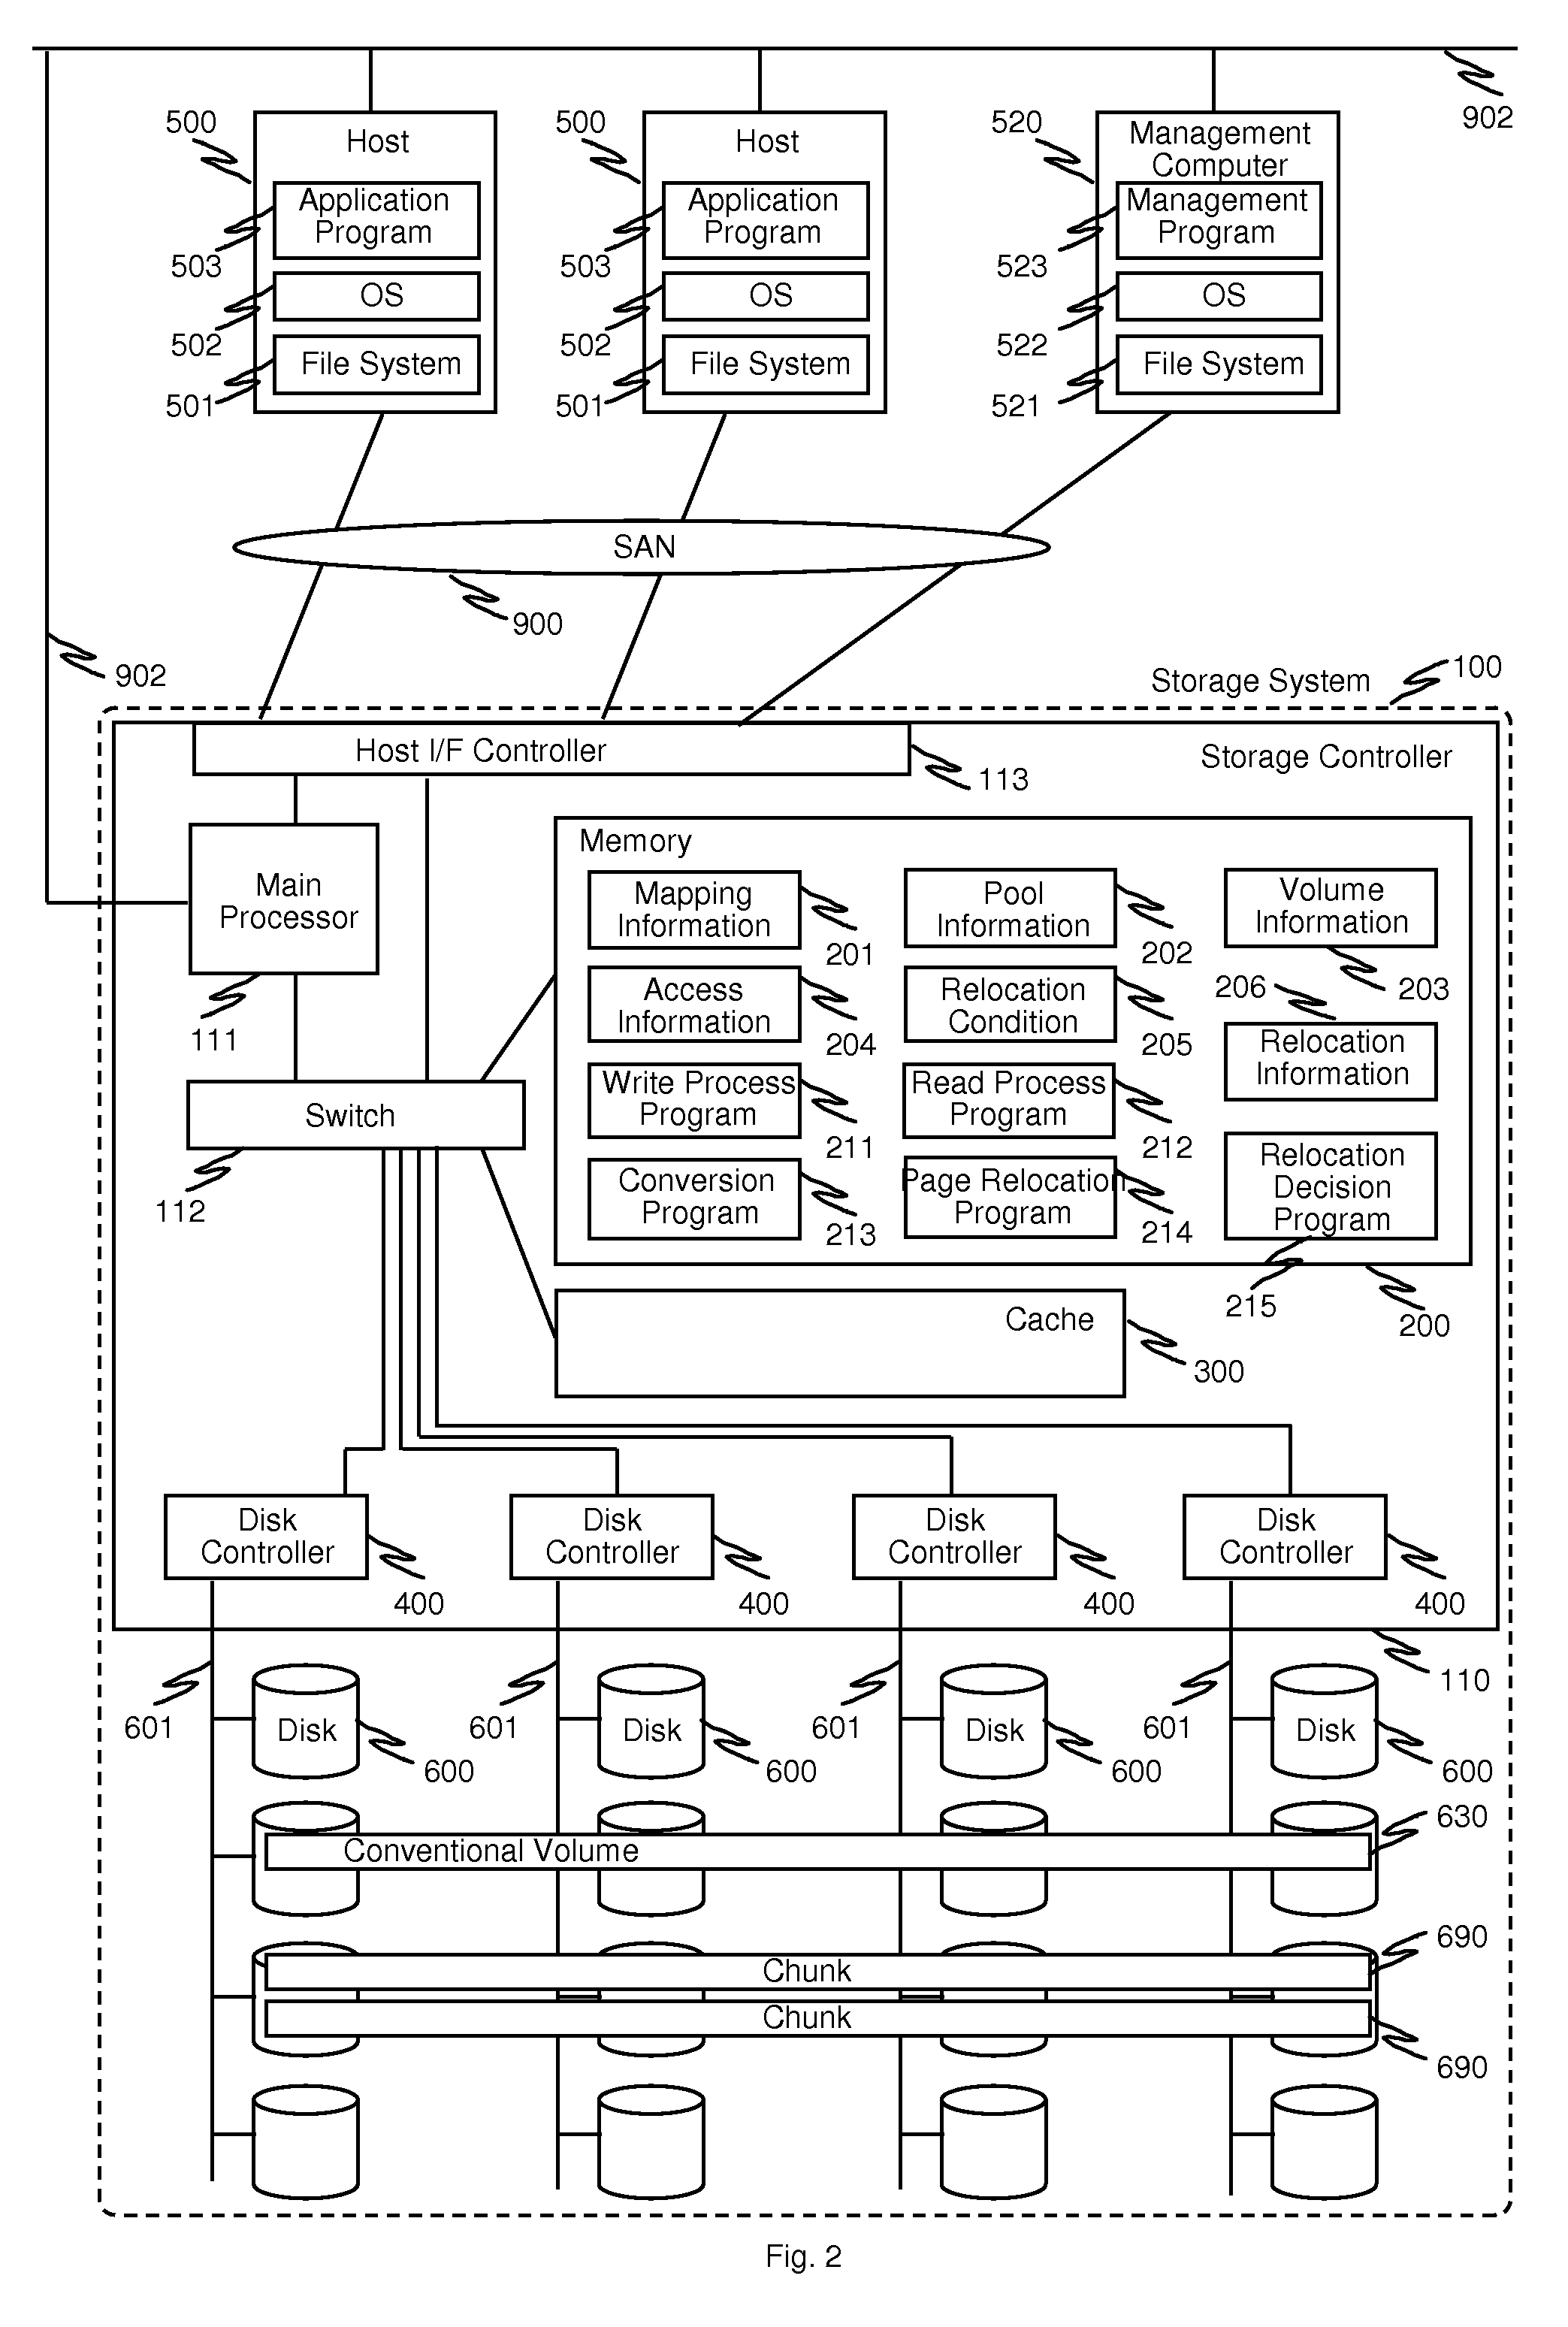 Method and apparatus for conversion between conventional volumes and thin provisioning with automated tier management